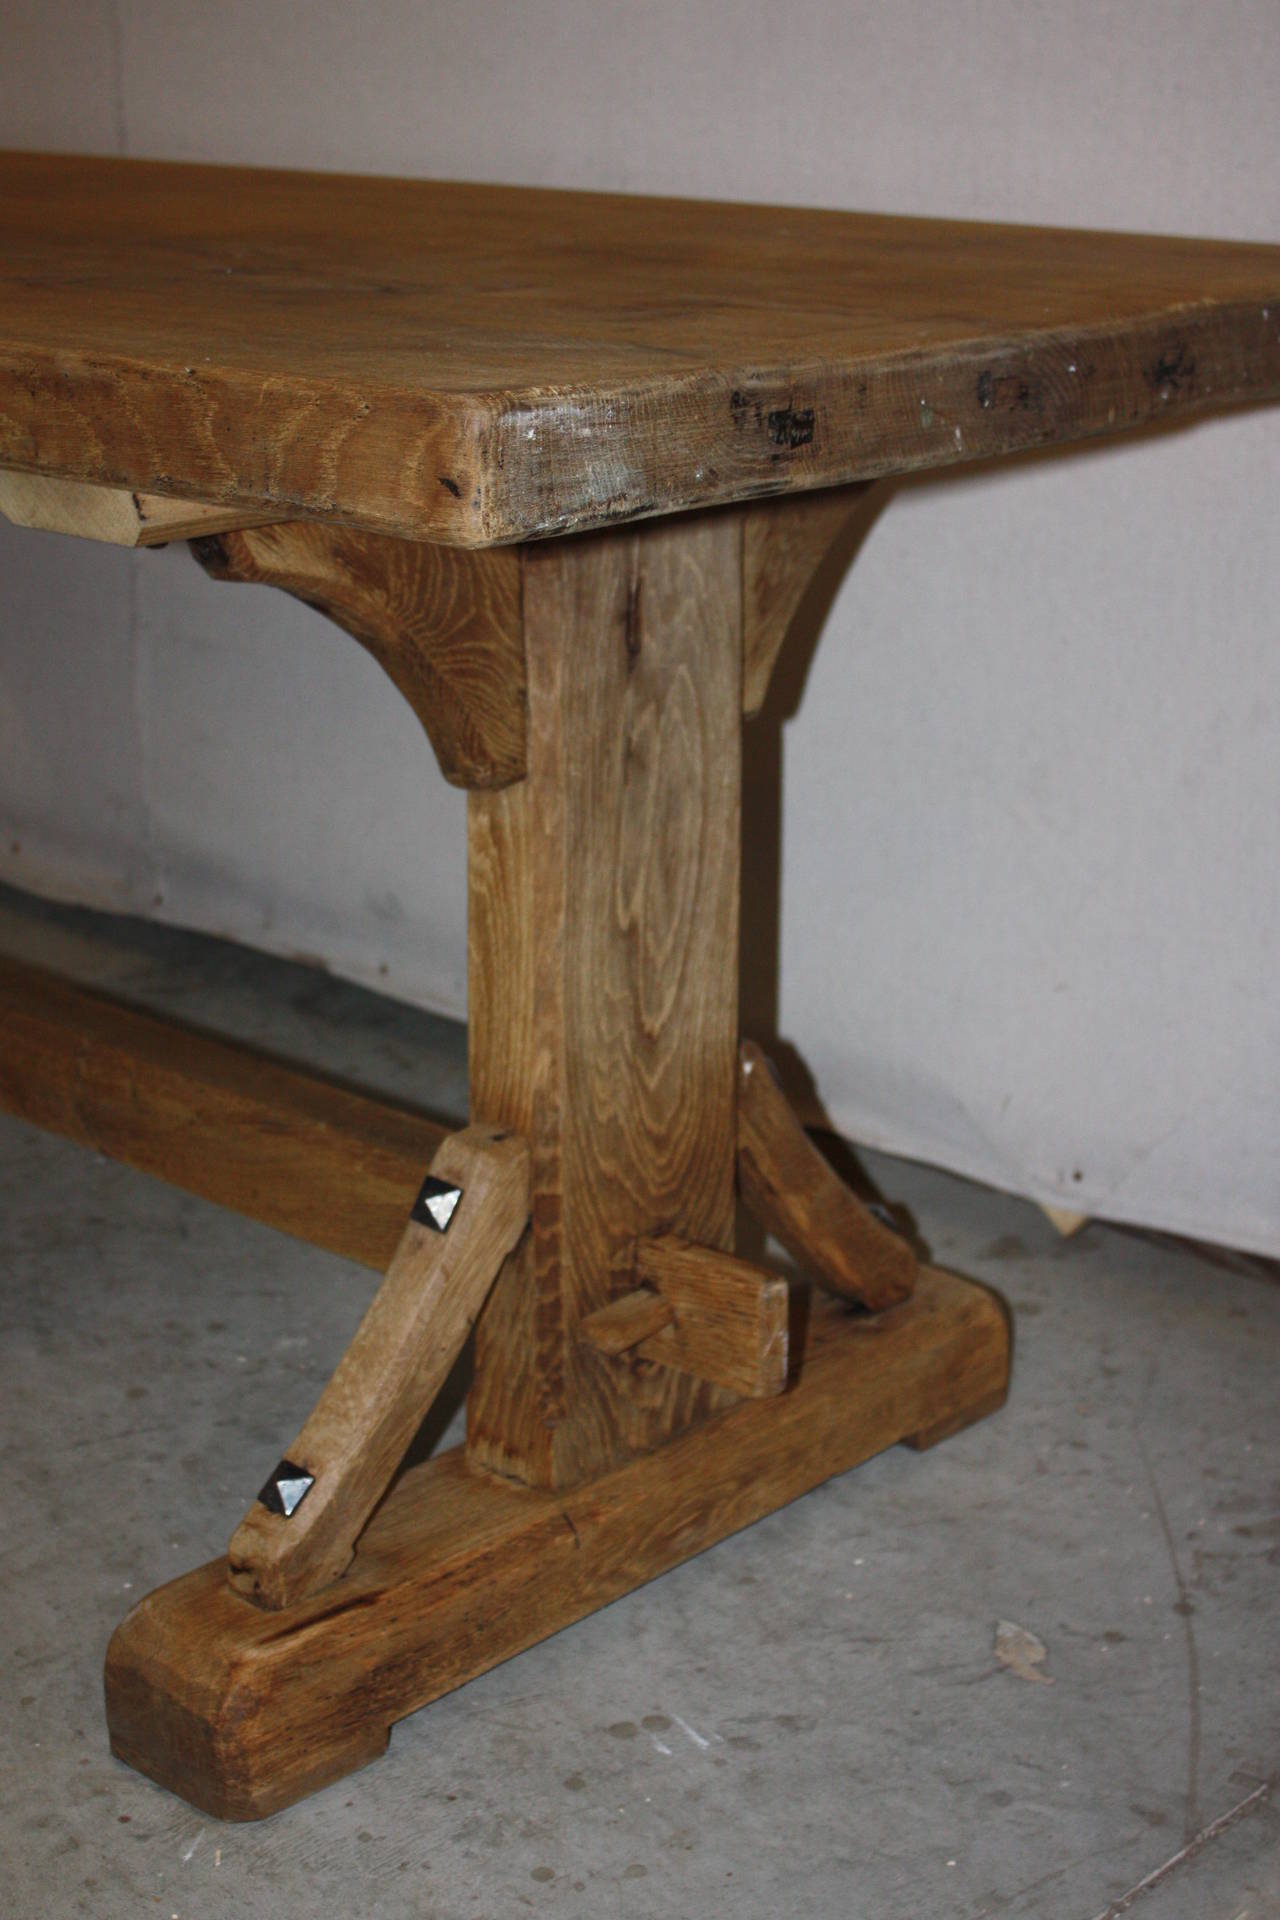 This is a great looking 19th century French oak trestle dining table. It has a beached or washed look to it. The grain of the wood is very nice and aged. The design of the tables base is very attractive.